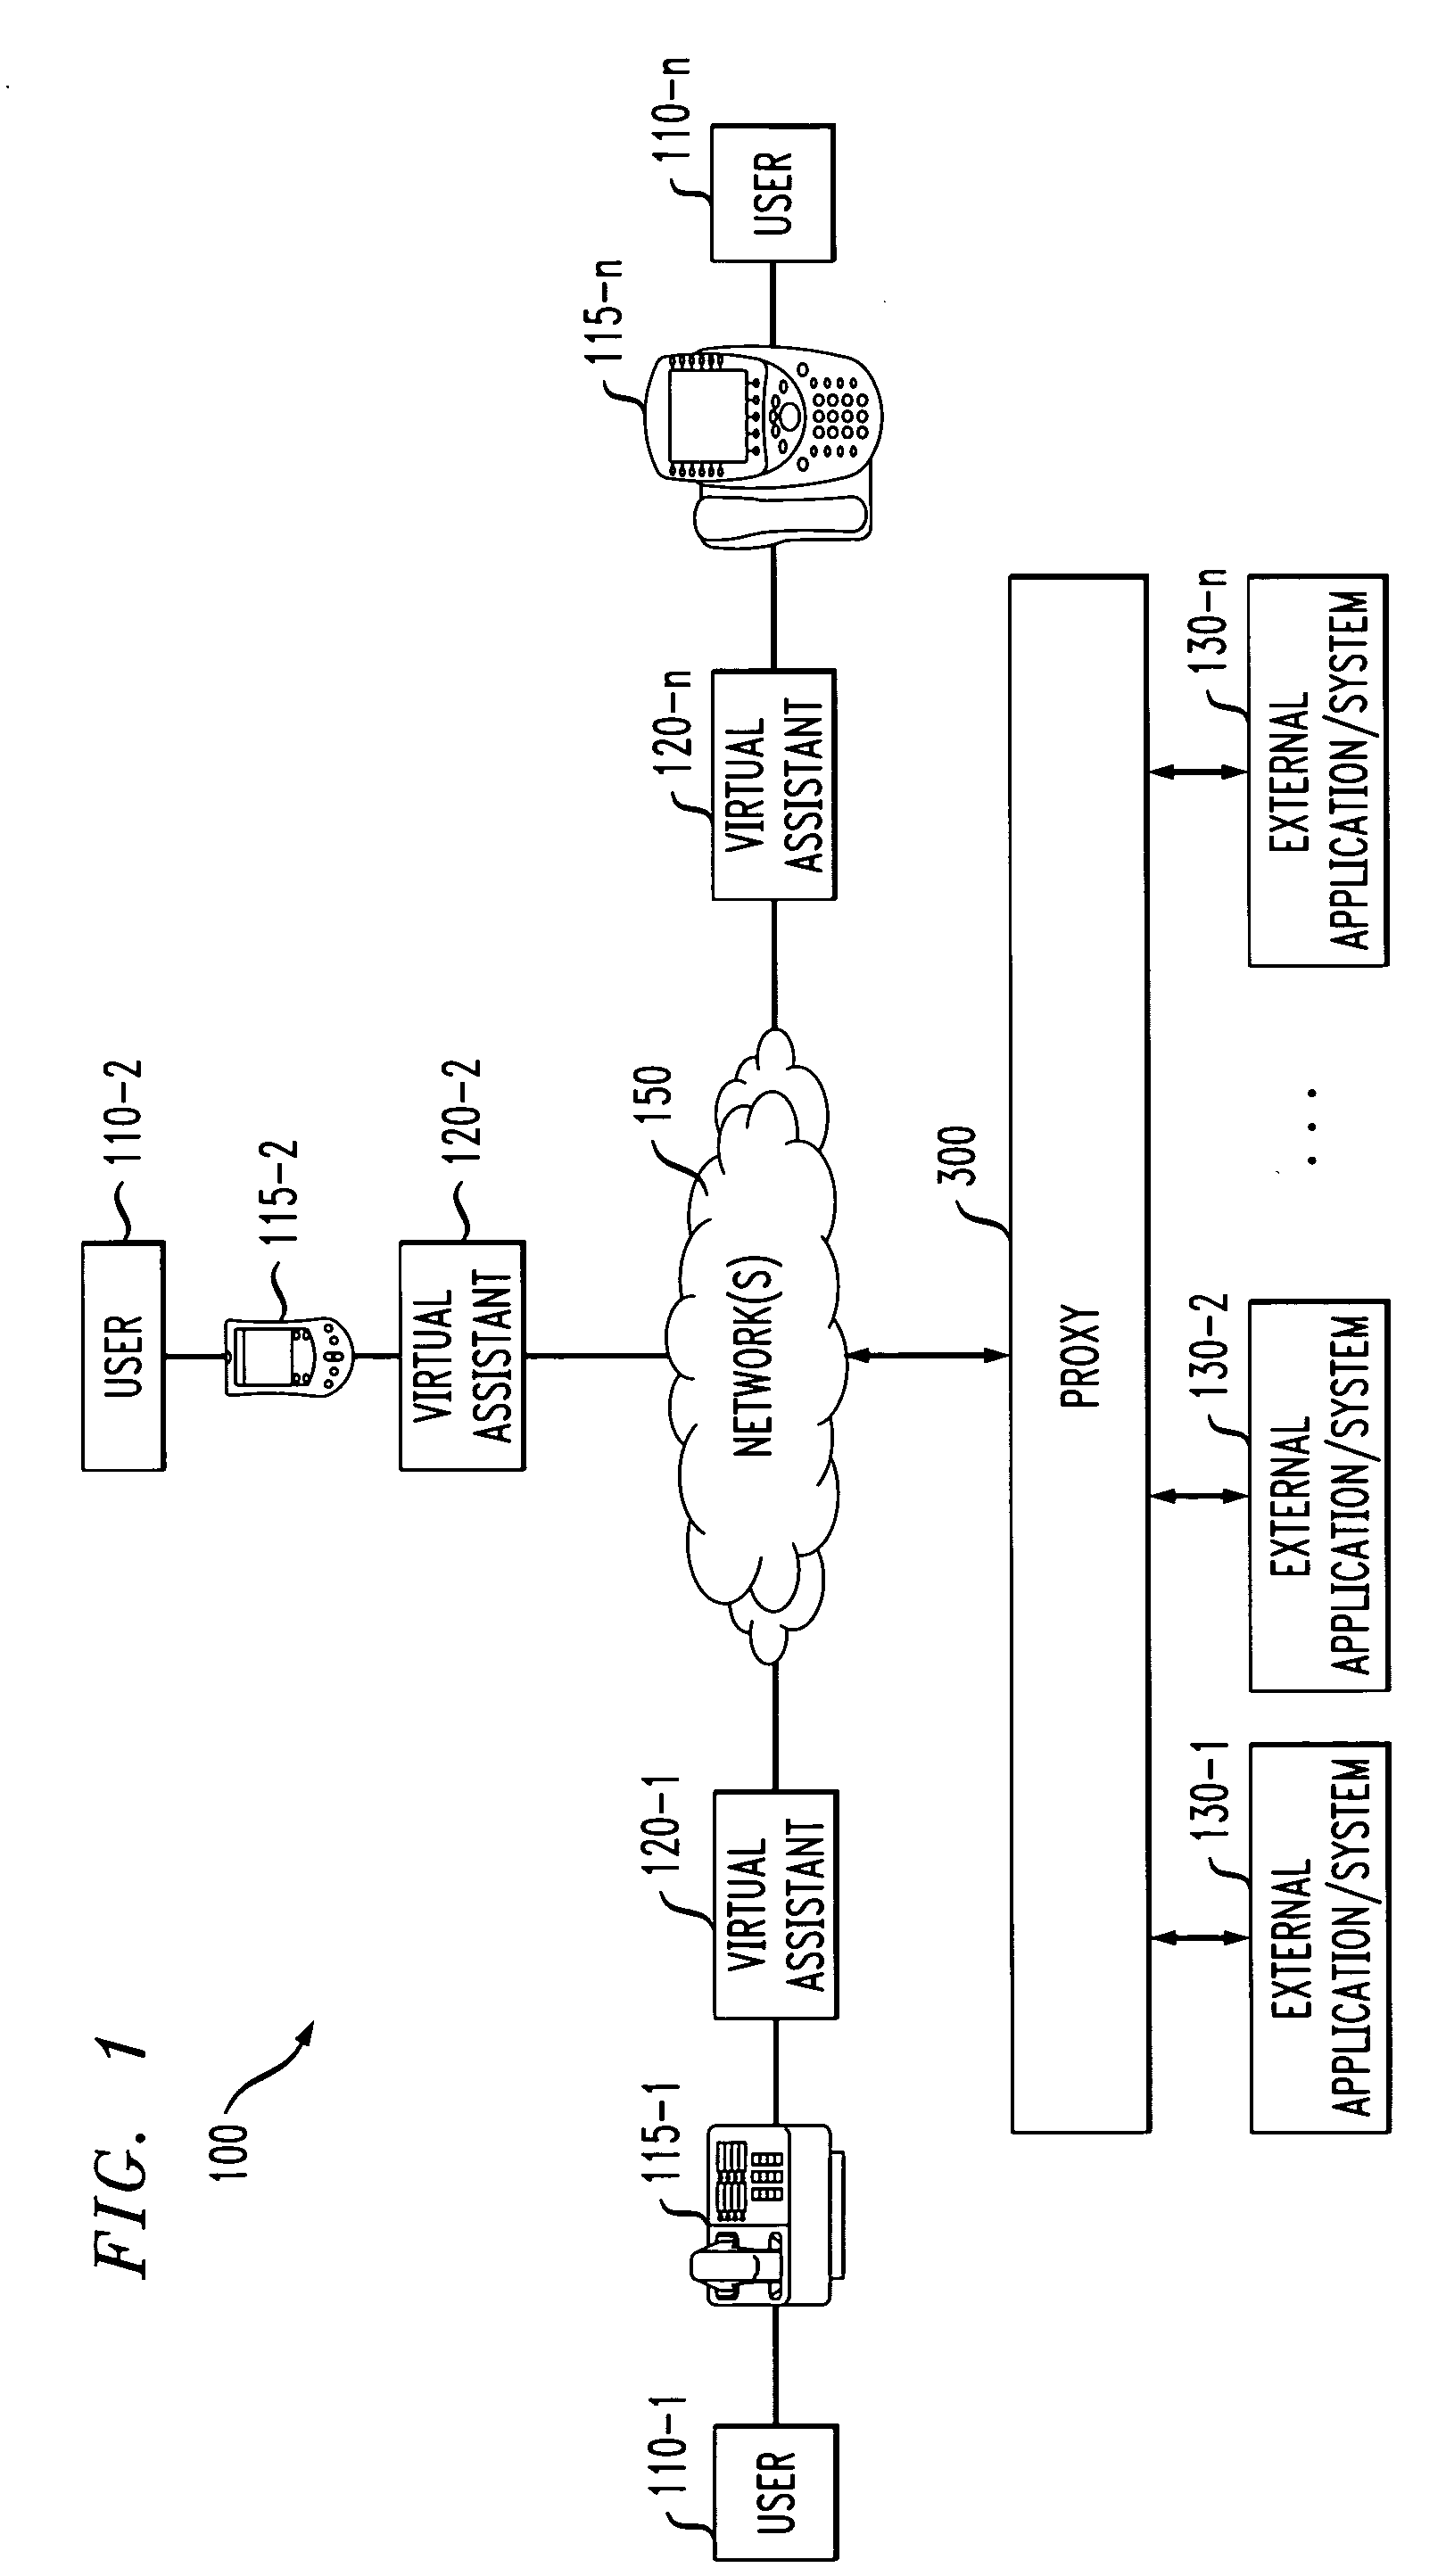 Method and apparatus for developing a virtual assistant for a communication